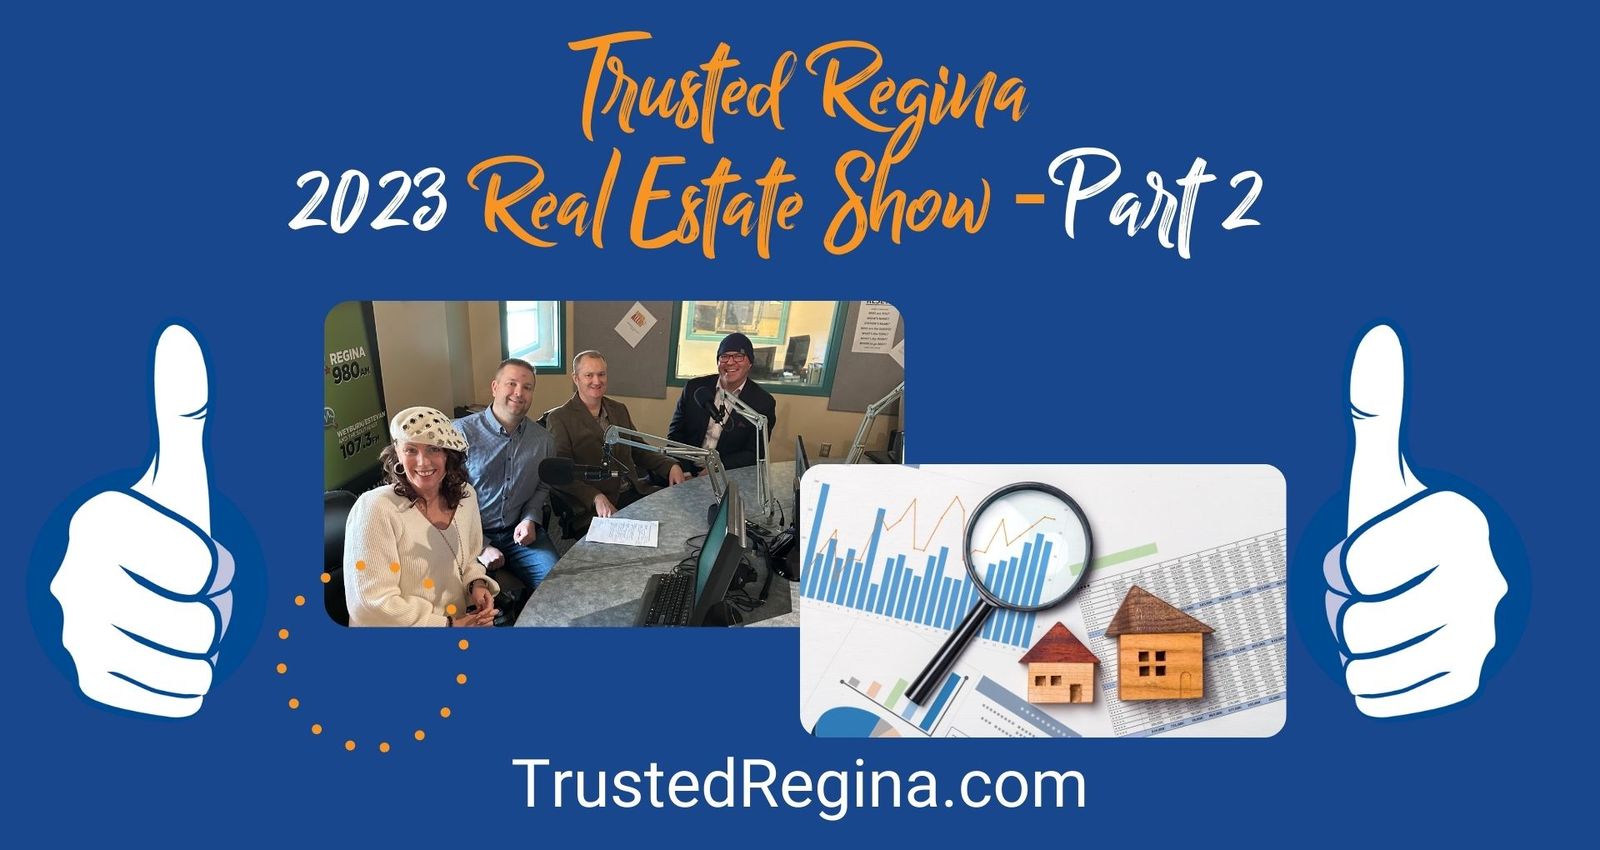 Trusted Regina Talk To The Real Estate Experts Show - Part 2 